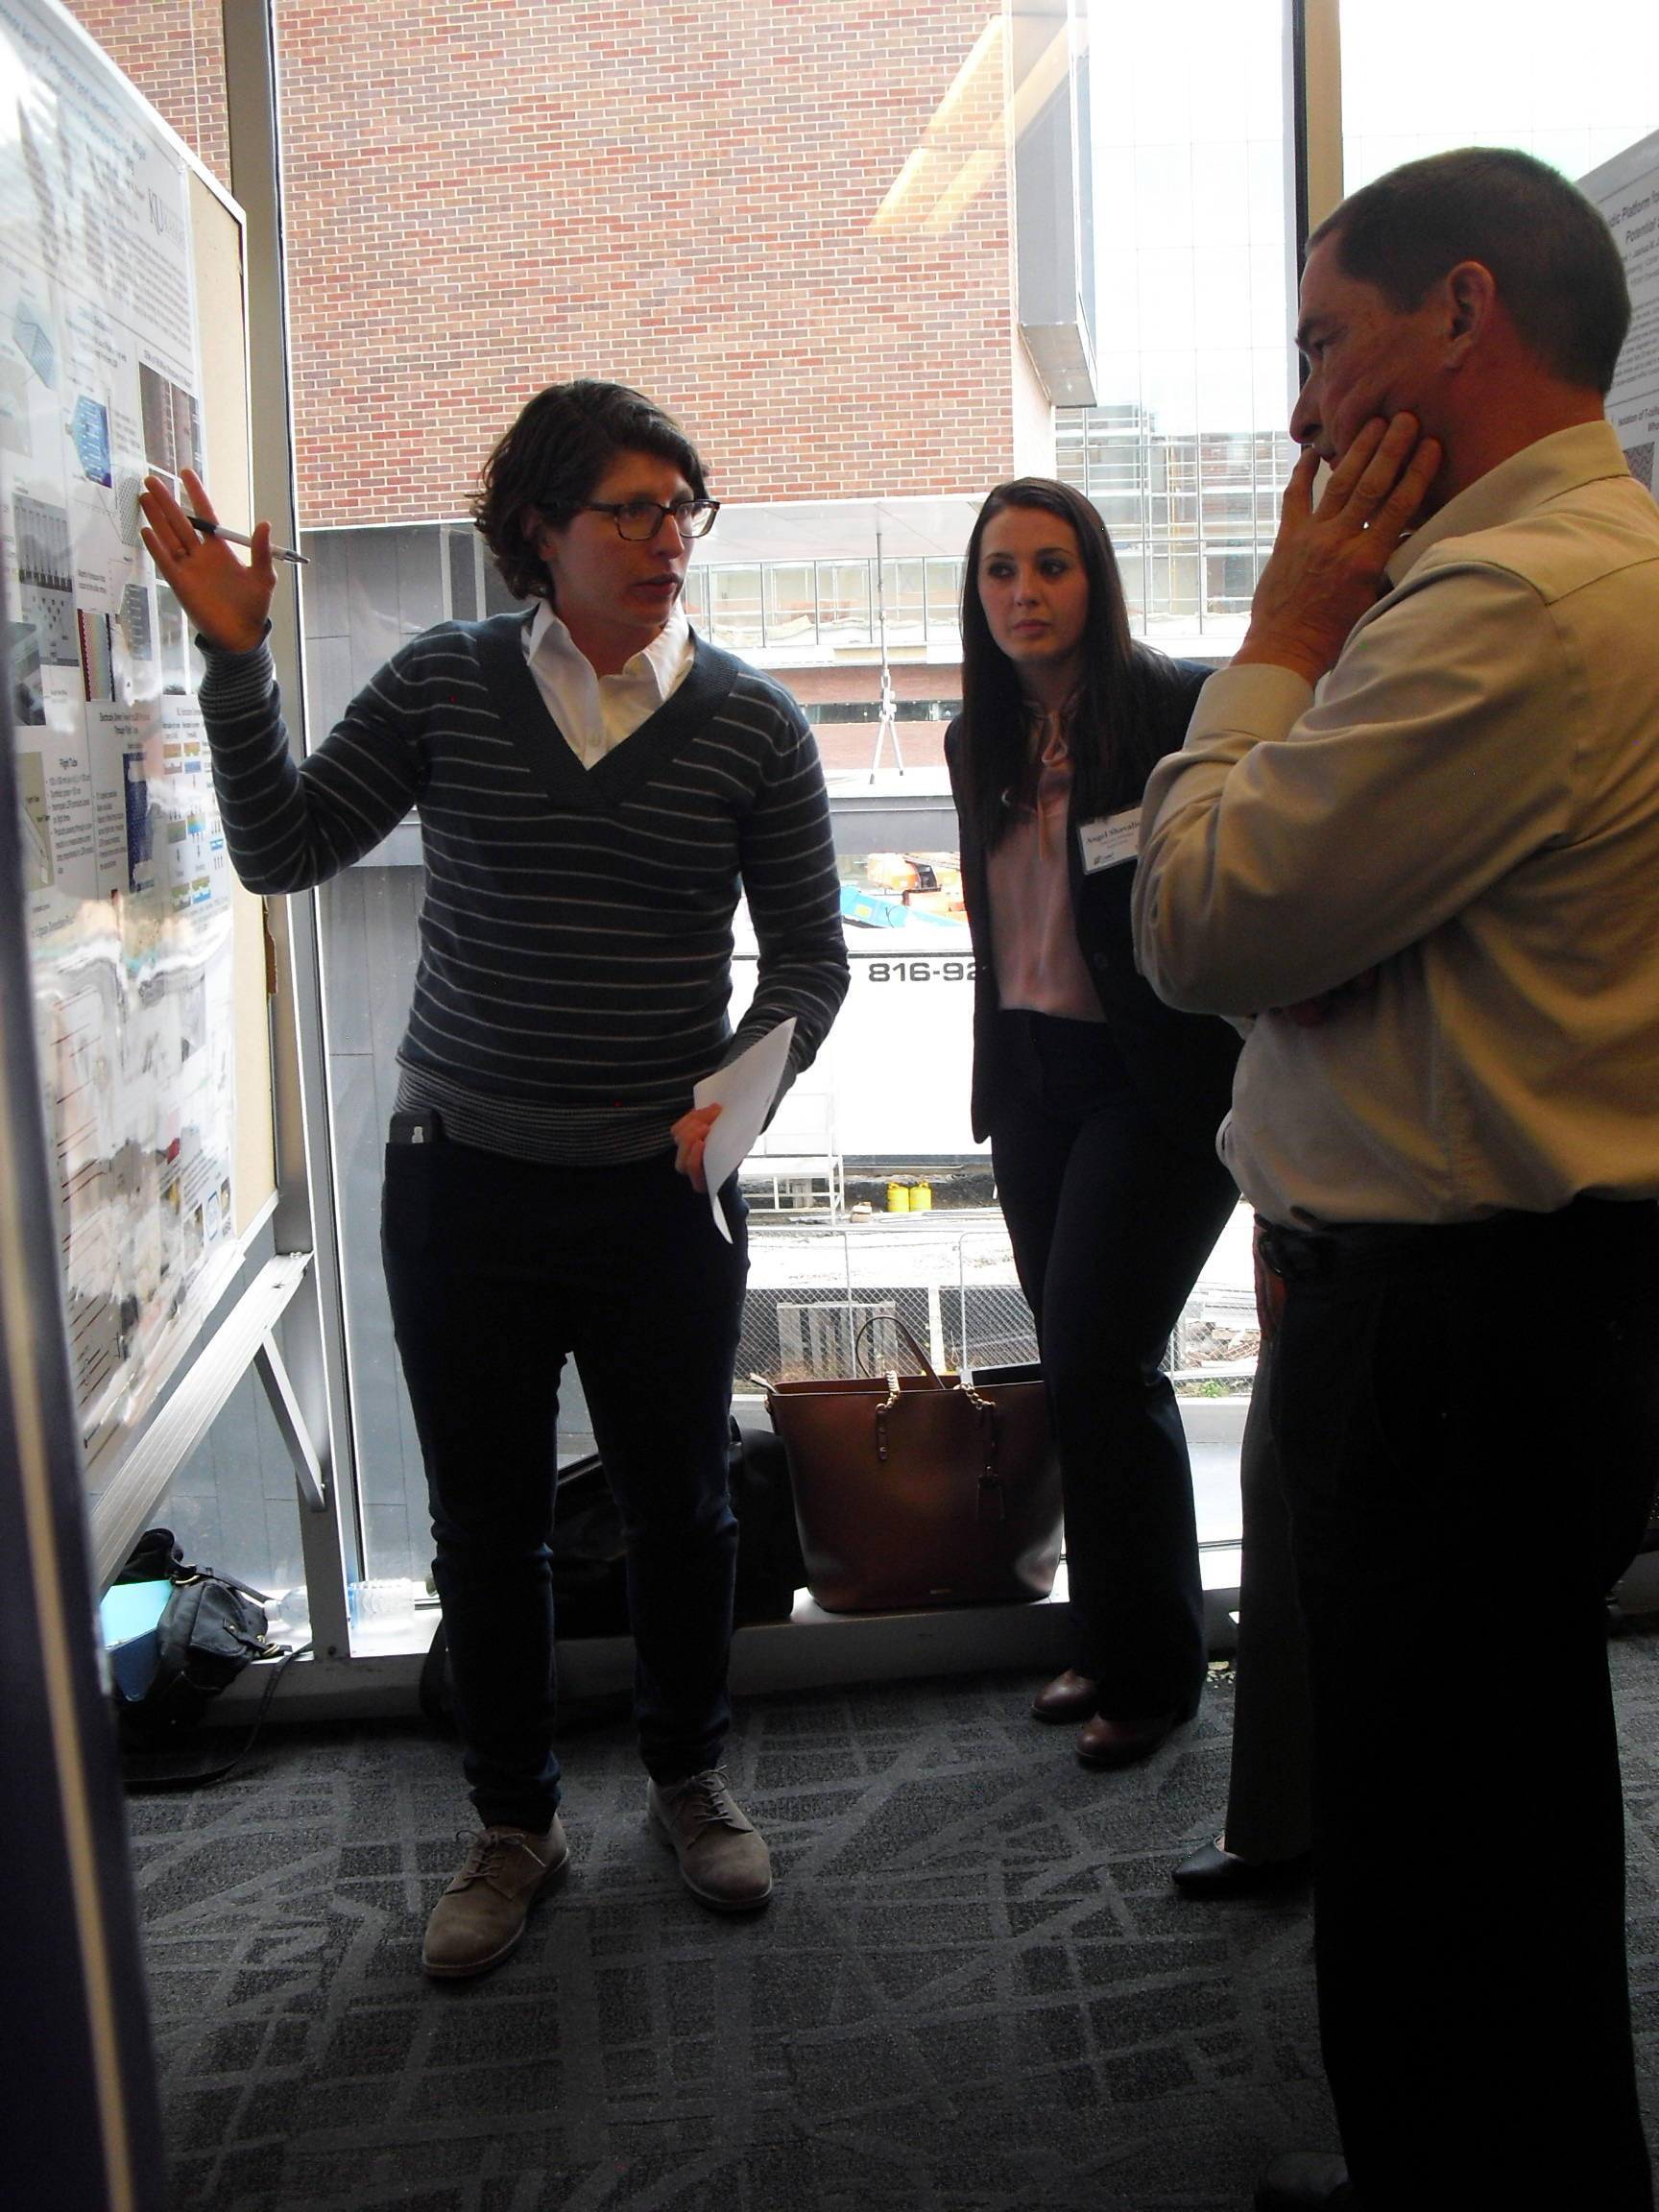 One individual explaining the details of their research poster to two attentive listeners.